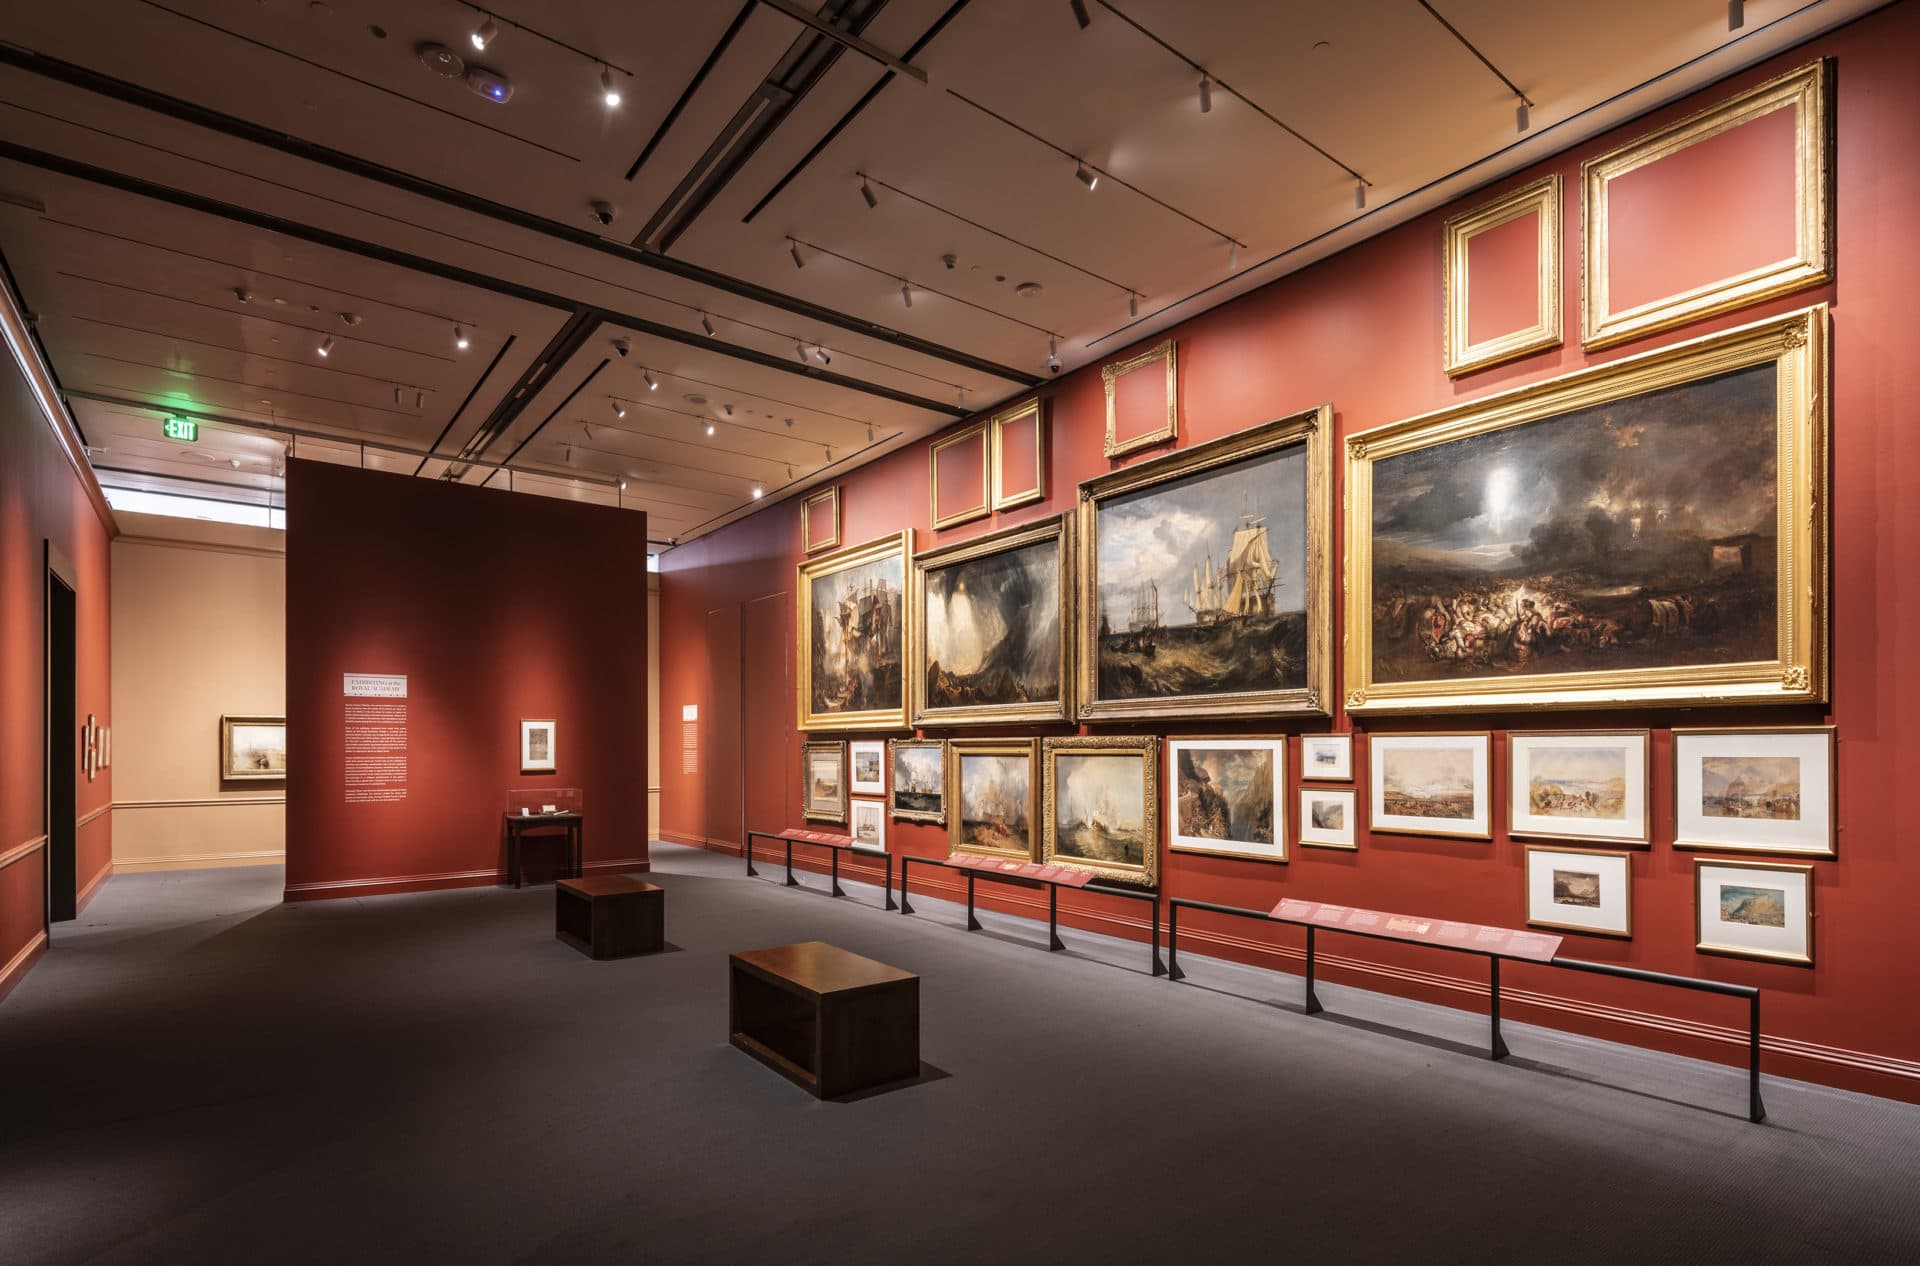 An installation view of "Turner’s Modern World" at the Museum of Fine Arts, Boston. (Courtesy Museum of Fine Arts, Boston)